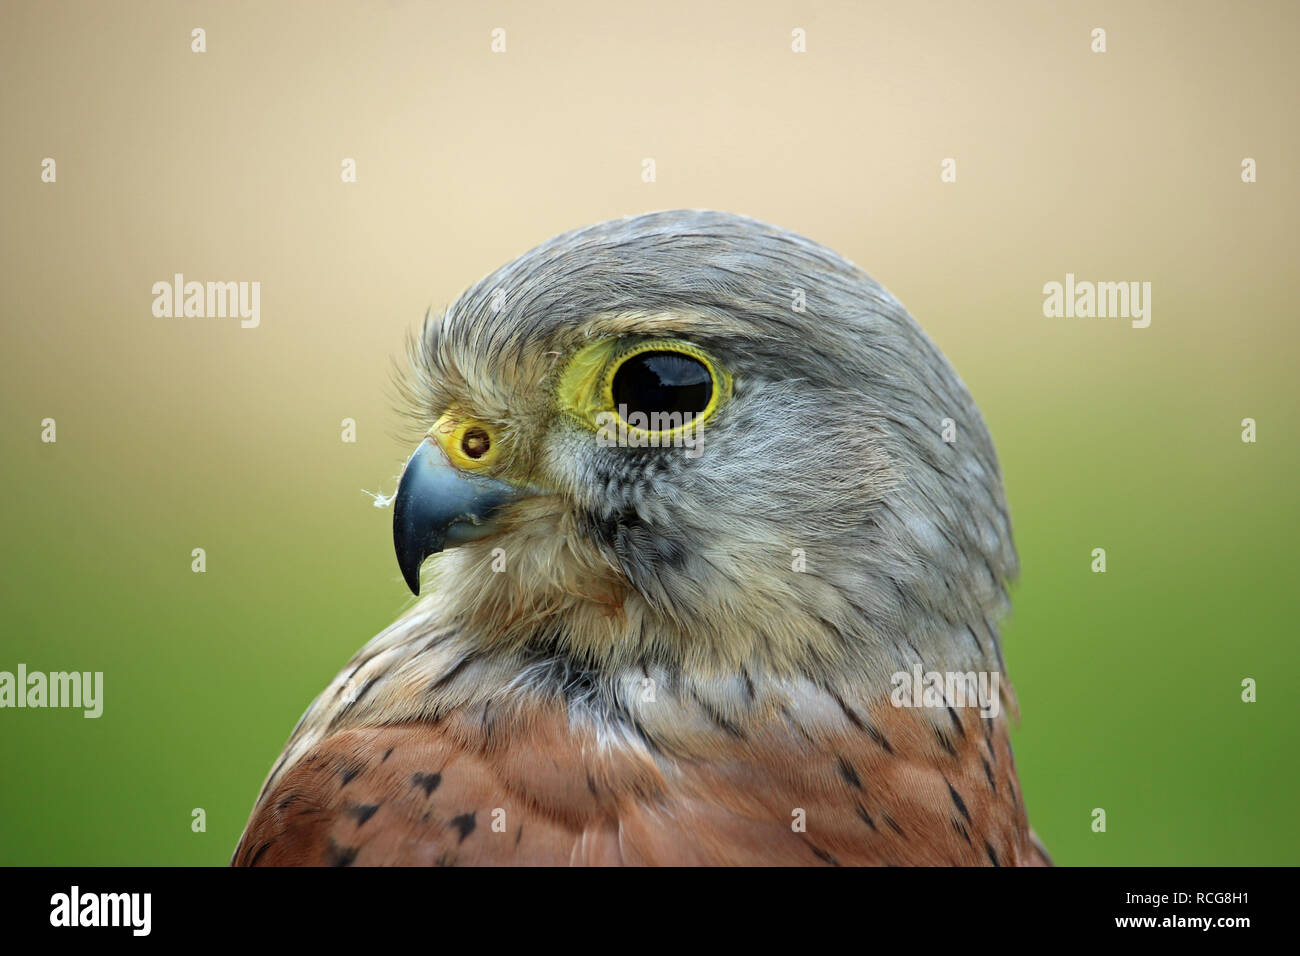 Head and shoulders of a kestrel (Falco tinnunculus) facing left with a green and brown blurred background. Stock Photo